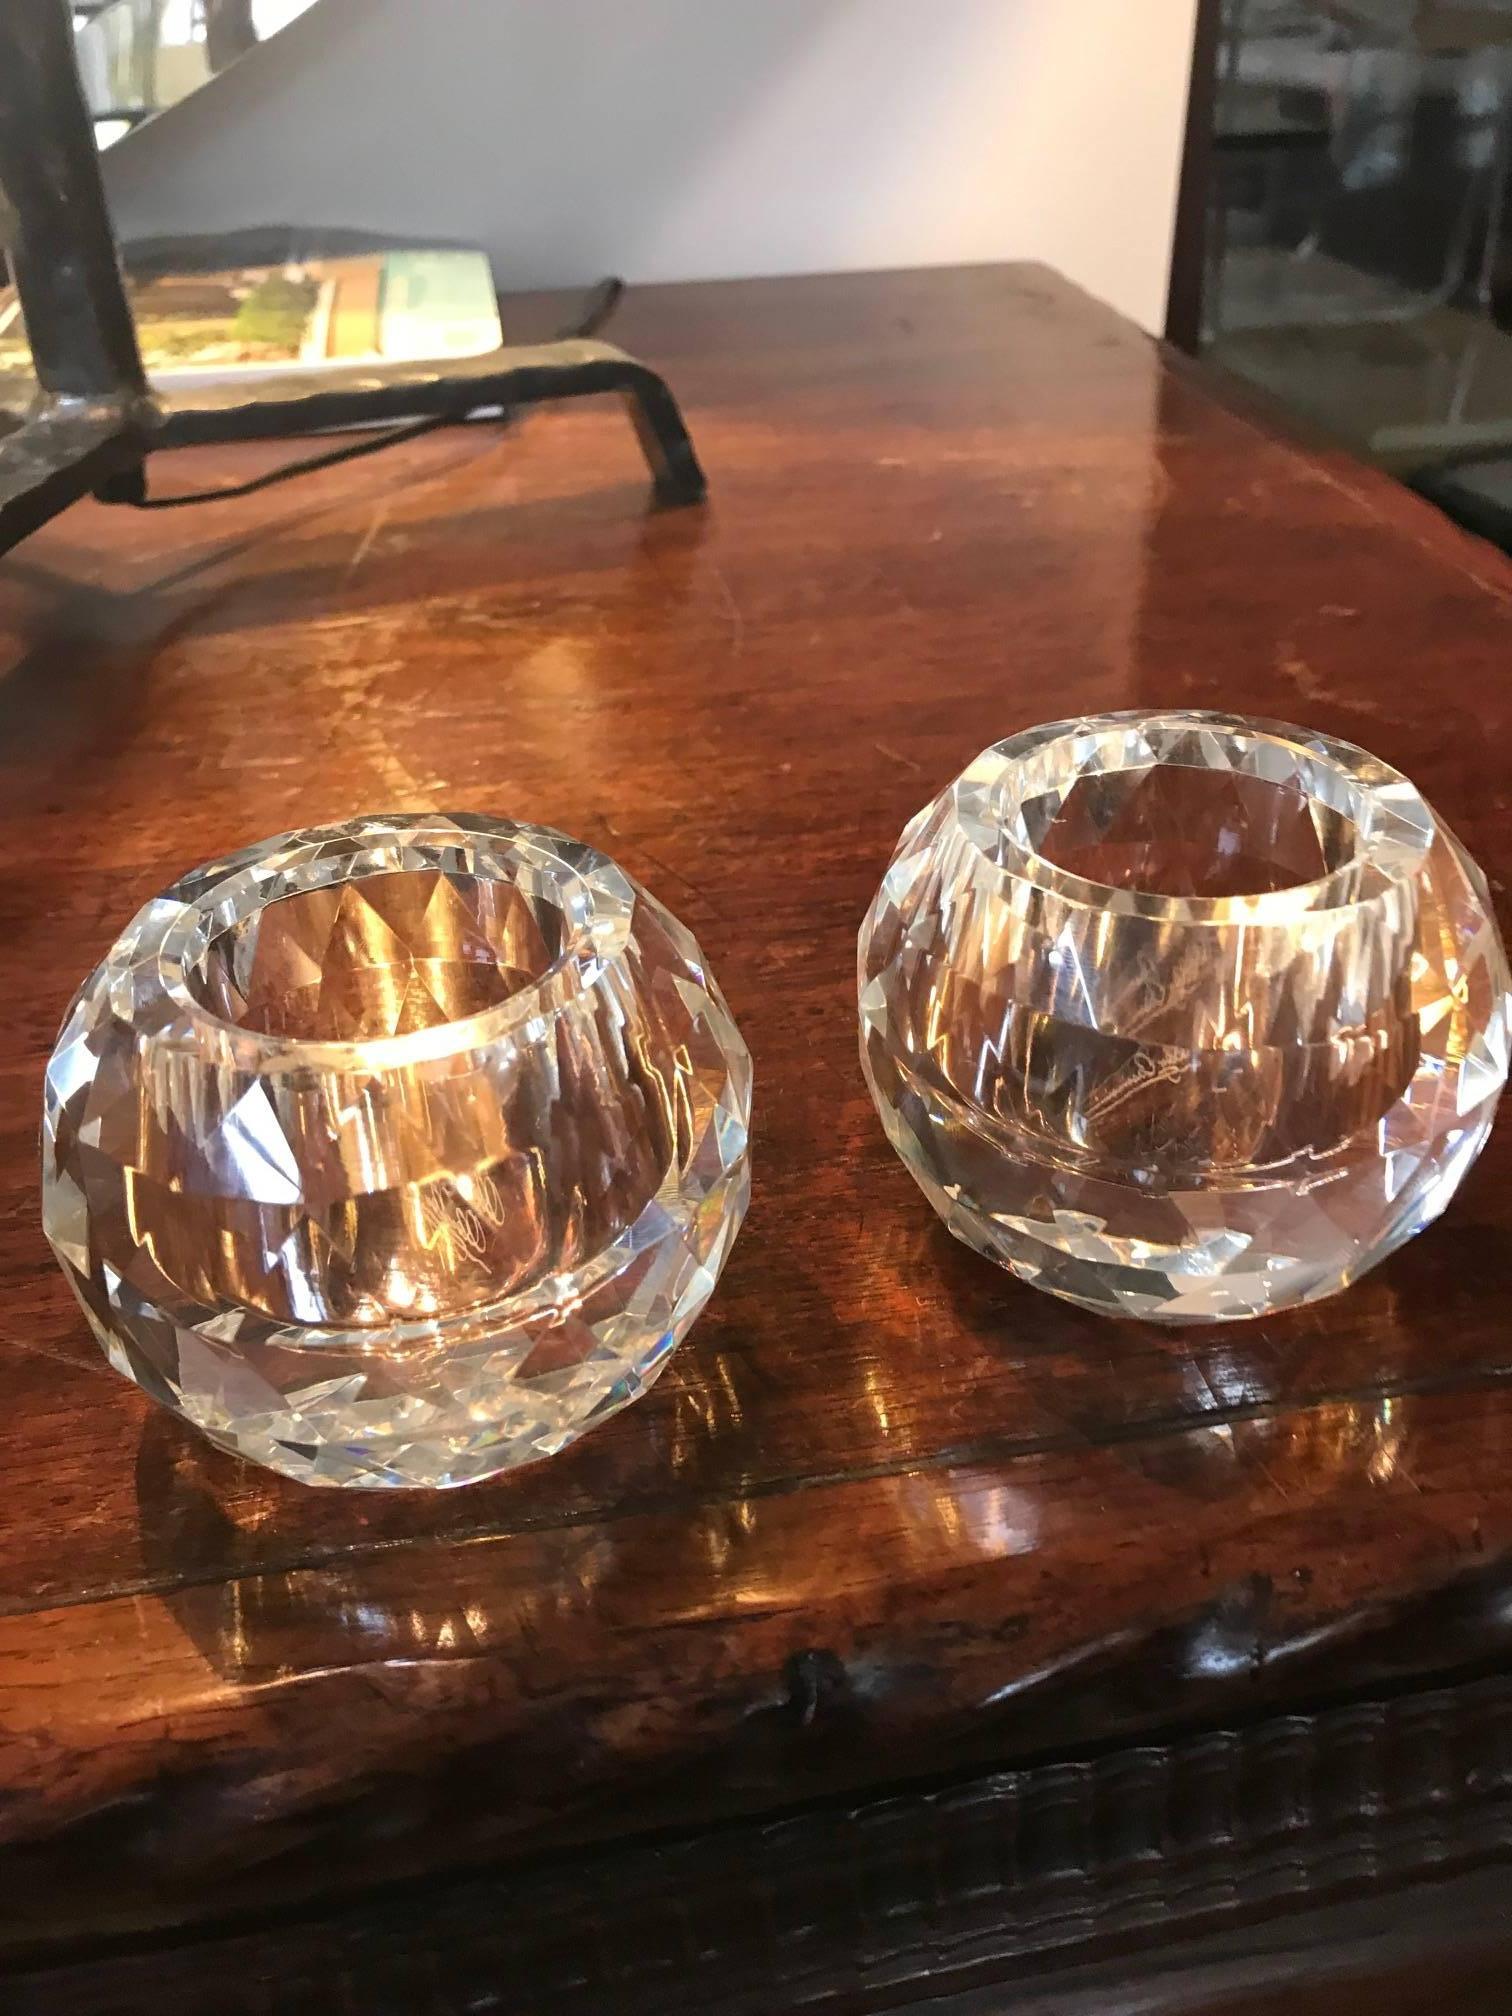 A pair of elegant Oleg Cassini midcentury faceted brilliant crystal glass votives.
Fantastic decorative tabletop objects.